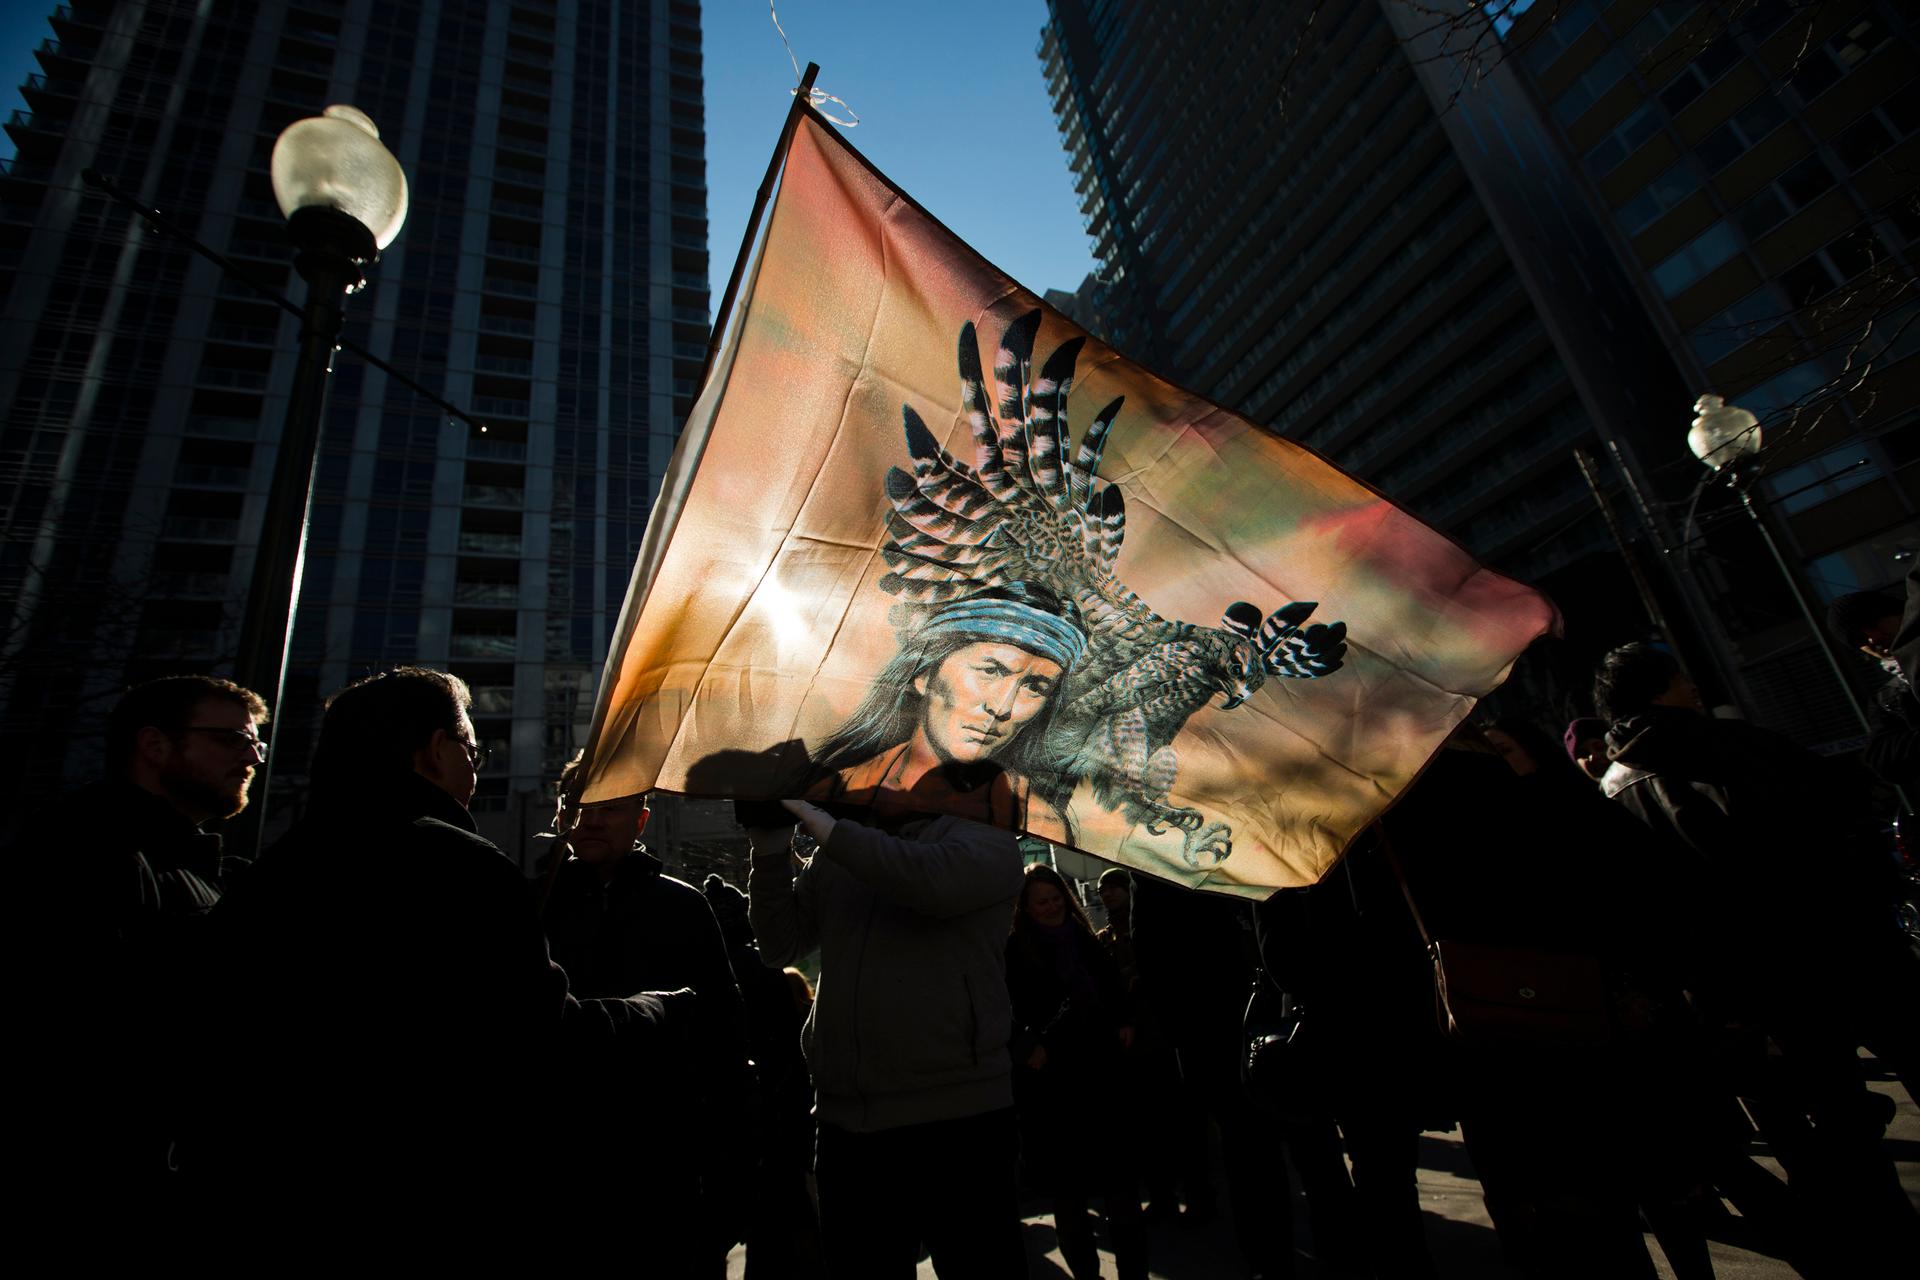 First Nations protesters are silhouetted behind a flag in a "Idle No More" demonstration in Toronto.